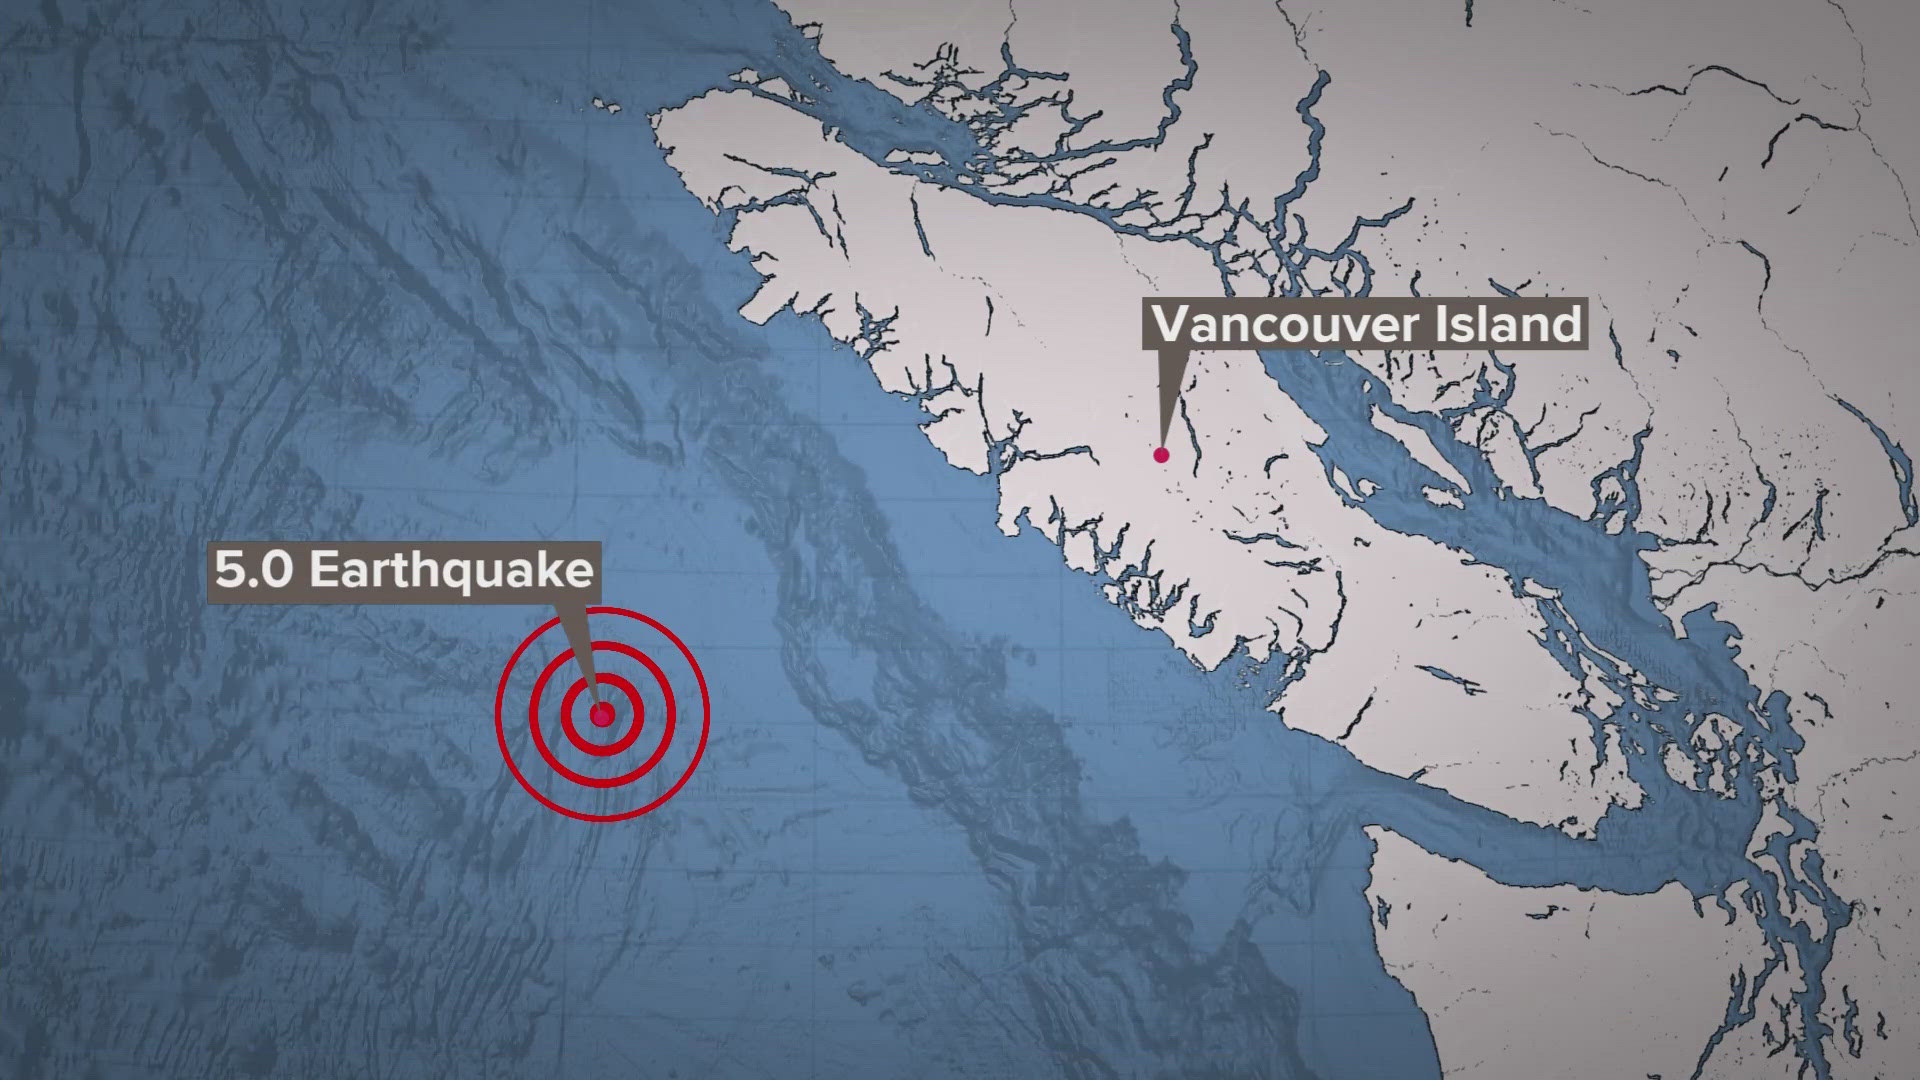 The earthquake took place approximately 125 miles west from Tofino, Canada.